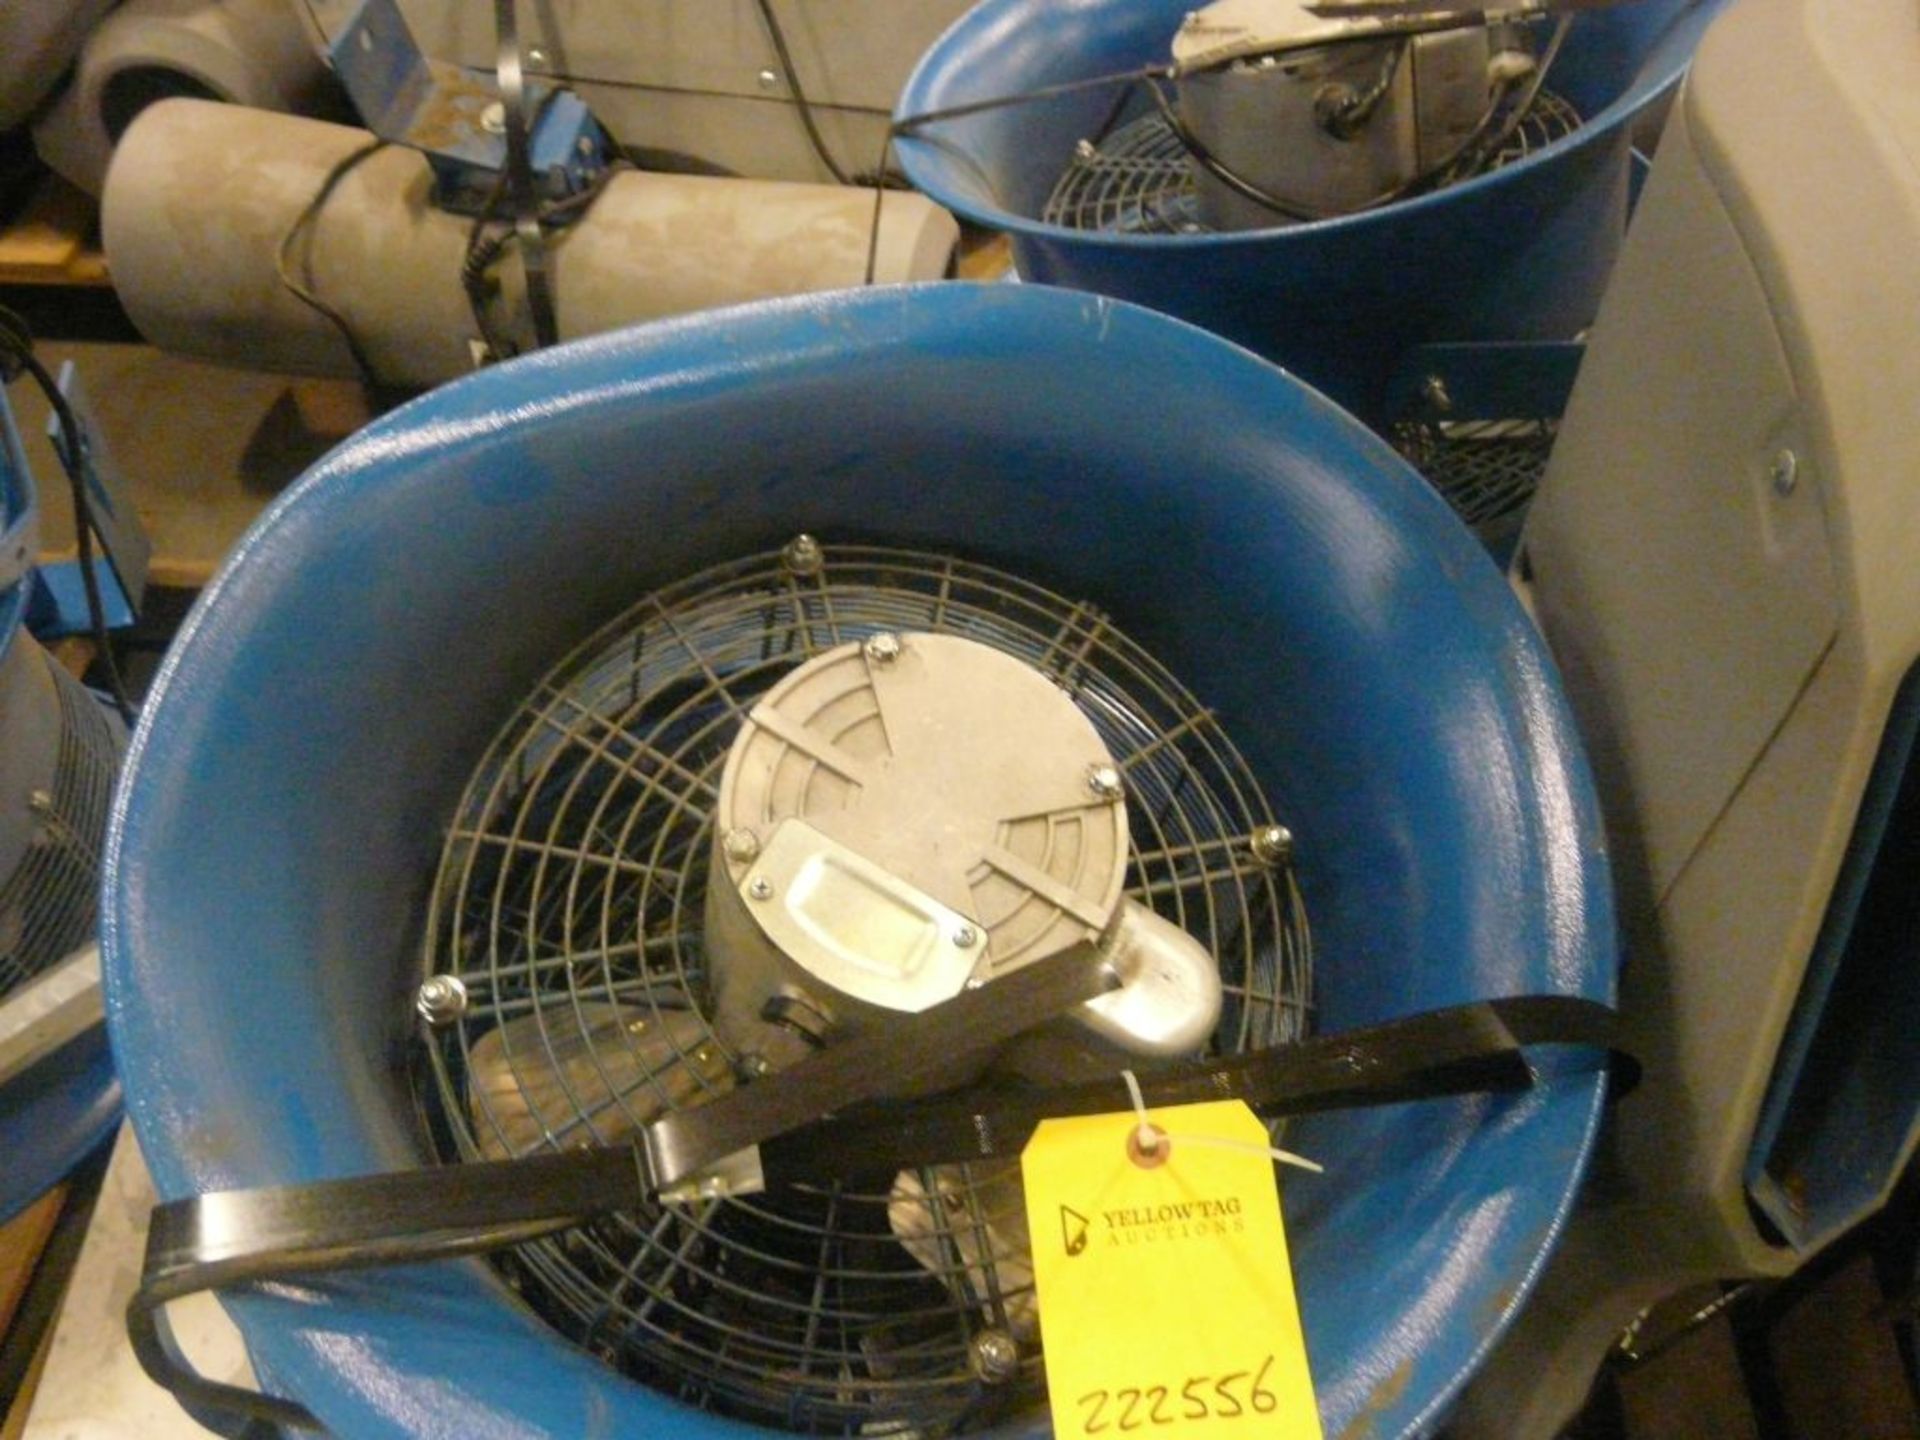 Lot of (5) Assorted Patterson Fans - (2) 18" Circle; (2) 14" Circle; (1) Quiet Fan; Tag: 222556; Lot - Image 4 of 10